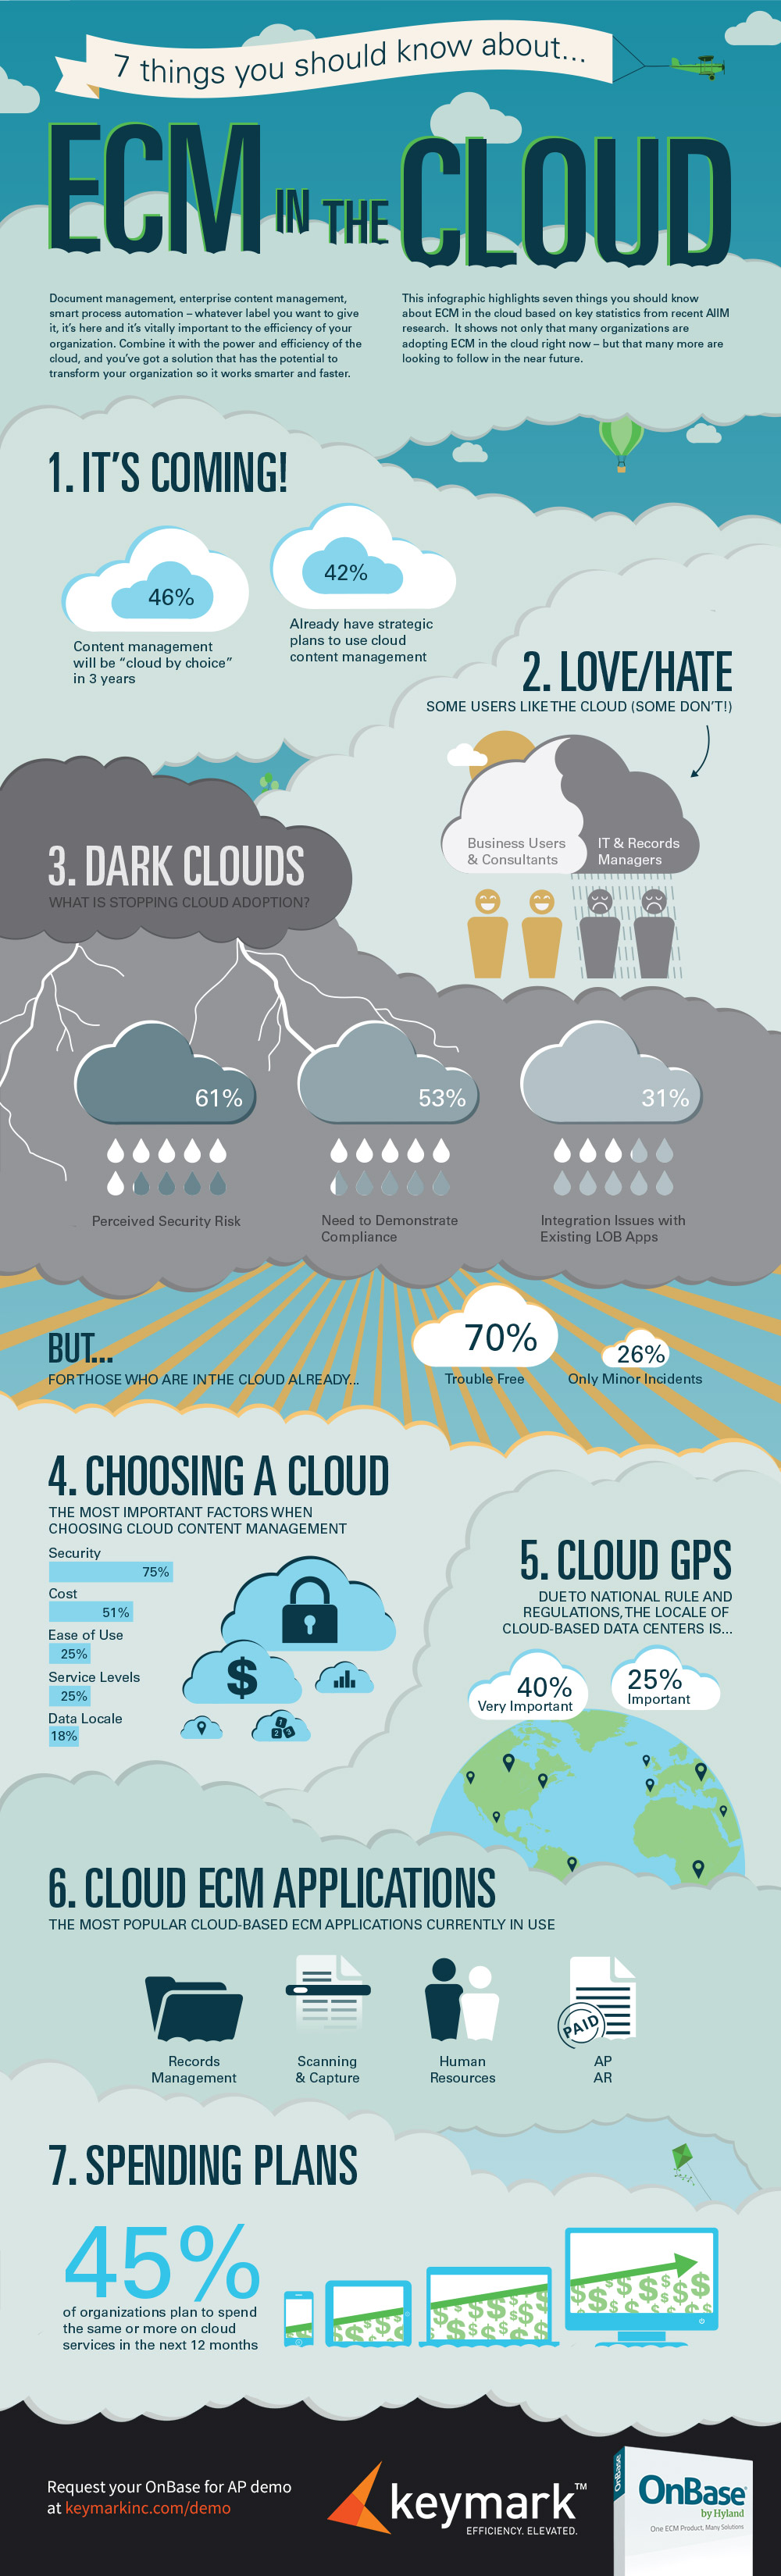 OnBase-ECM-in-the-cloud-Infographic